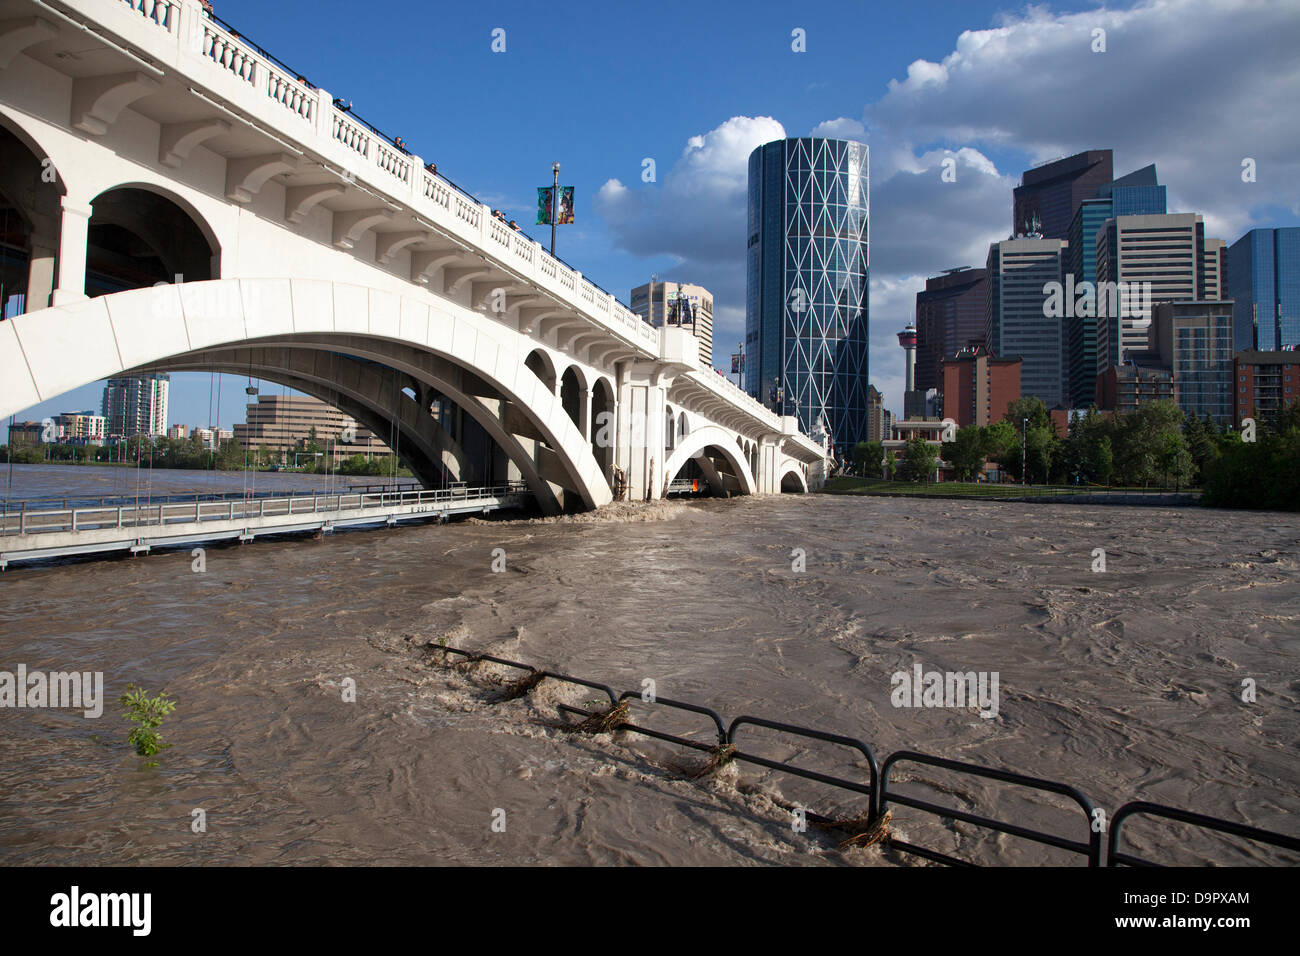 Saturday, June 22, 2013. The bike path at Centre Street Bridge underwater as floodwaters recede the day after peak flows in central Calgary, Alberta, Canada. Heavy rains caused severe flooding and led to declaration of a state of emergency, mandatory evacuation orders for the downtown core and many residential areas, power outages and property damage. Stock Photo